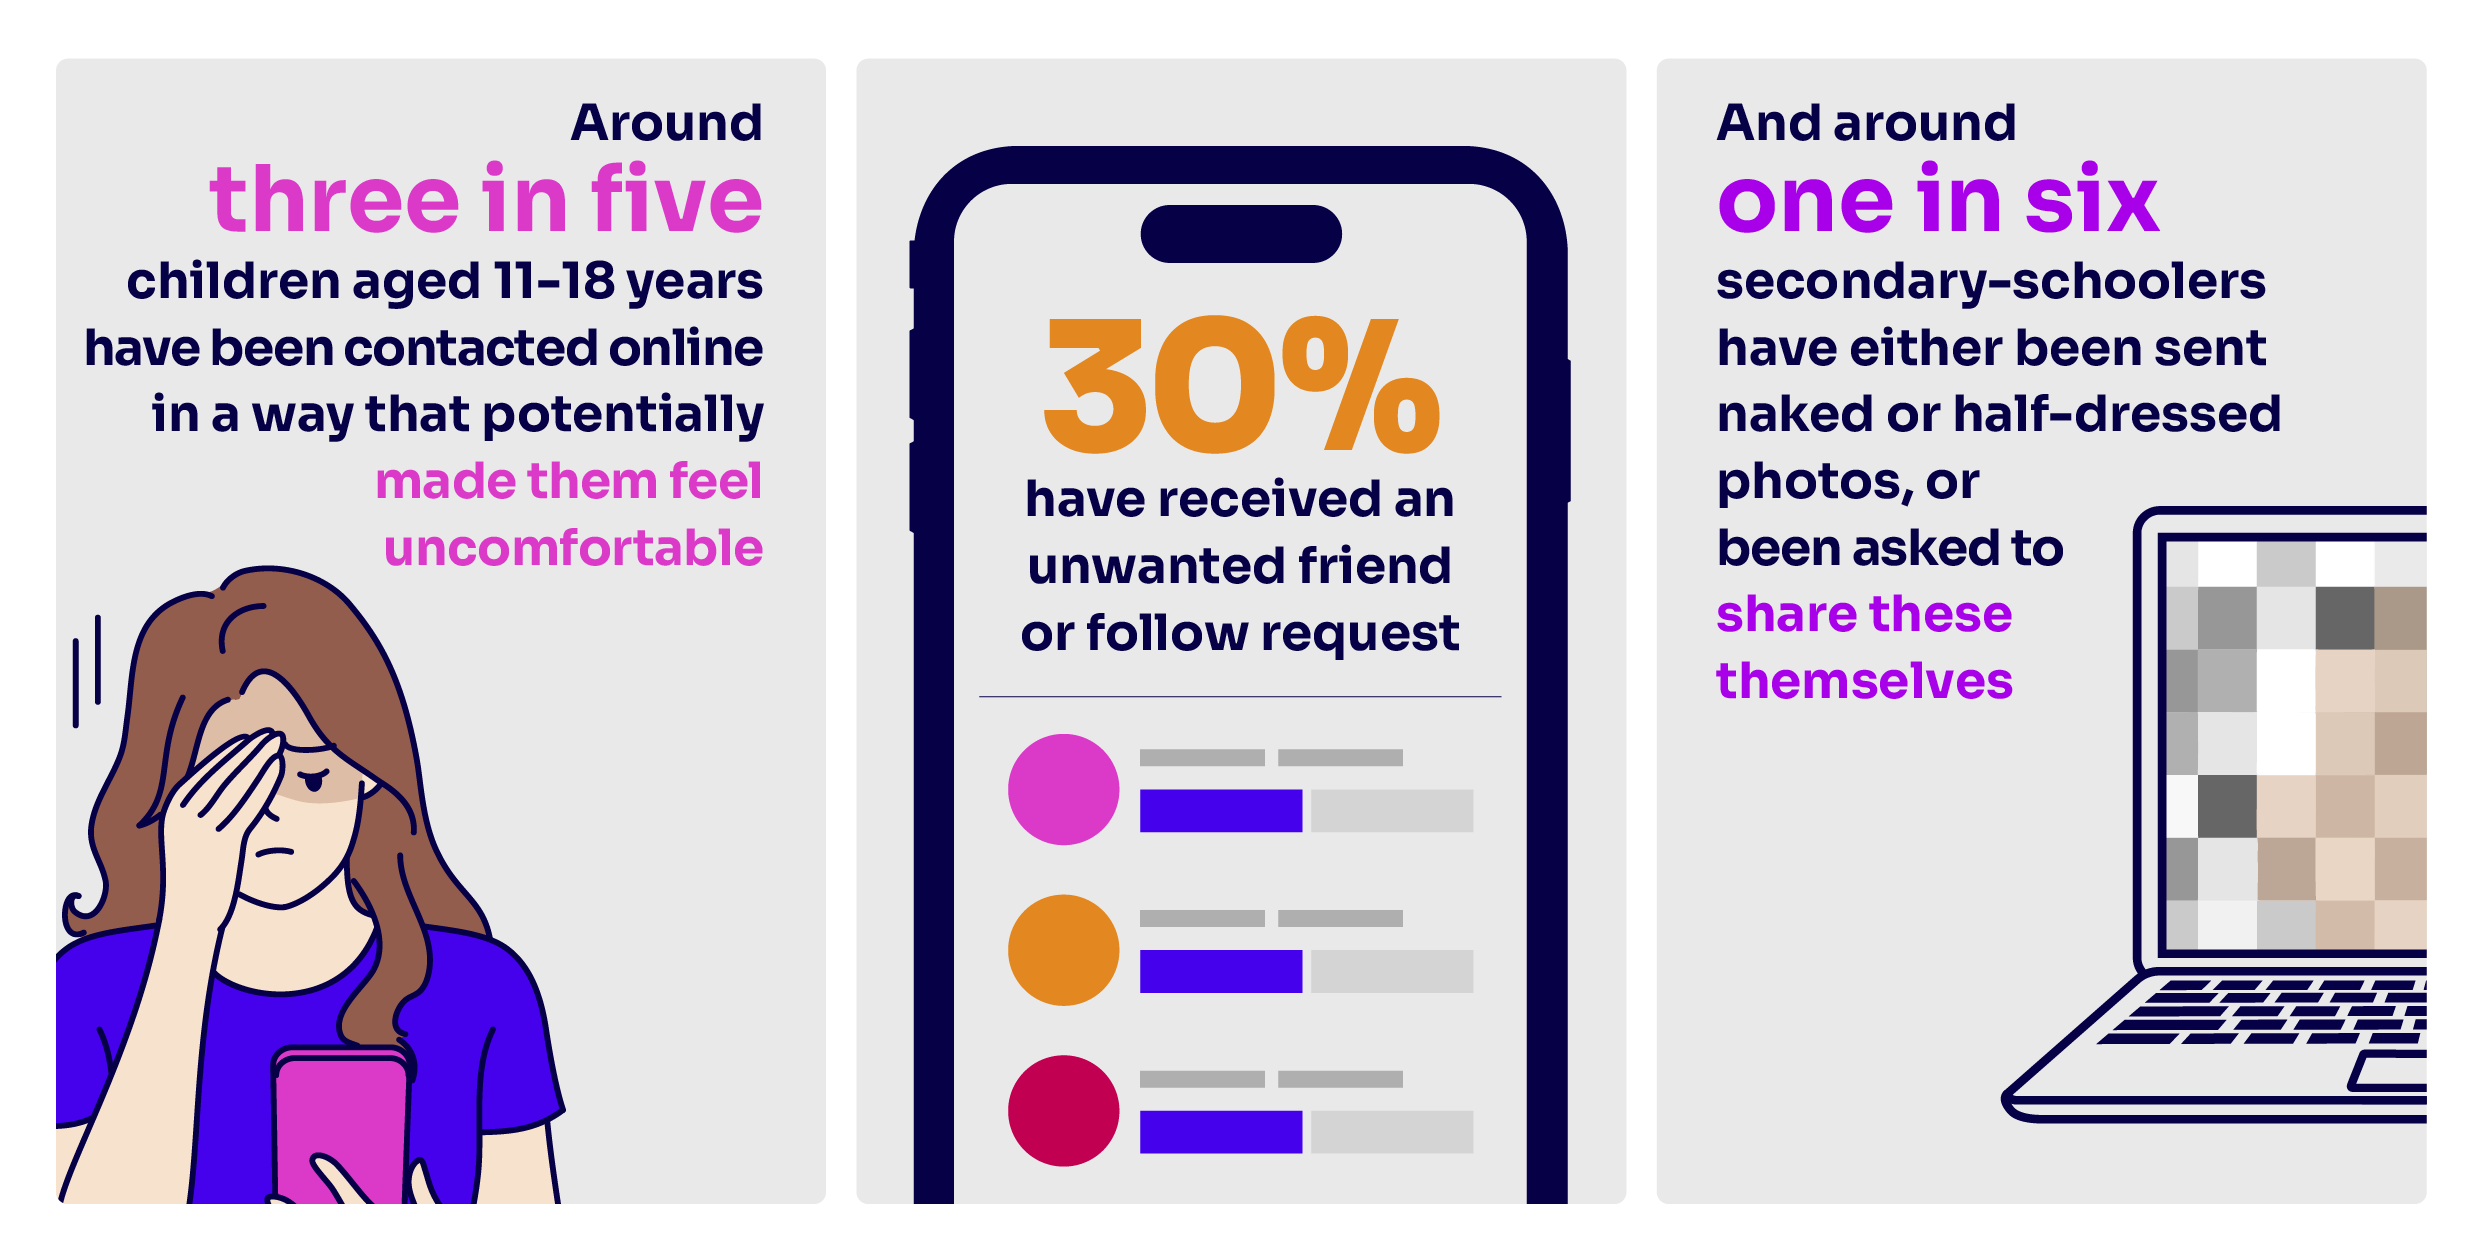 Around three in five children aged 11-18 have been contacted online in a way that potentially made them feel uncomfortable. 30% have received an unwanted friend or follow request, and around one in six secondary-schoolers have either been sent naked or half-dressed photos, or been asked to share these themselves.